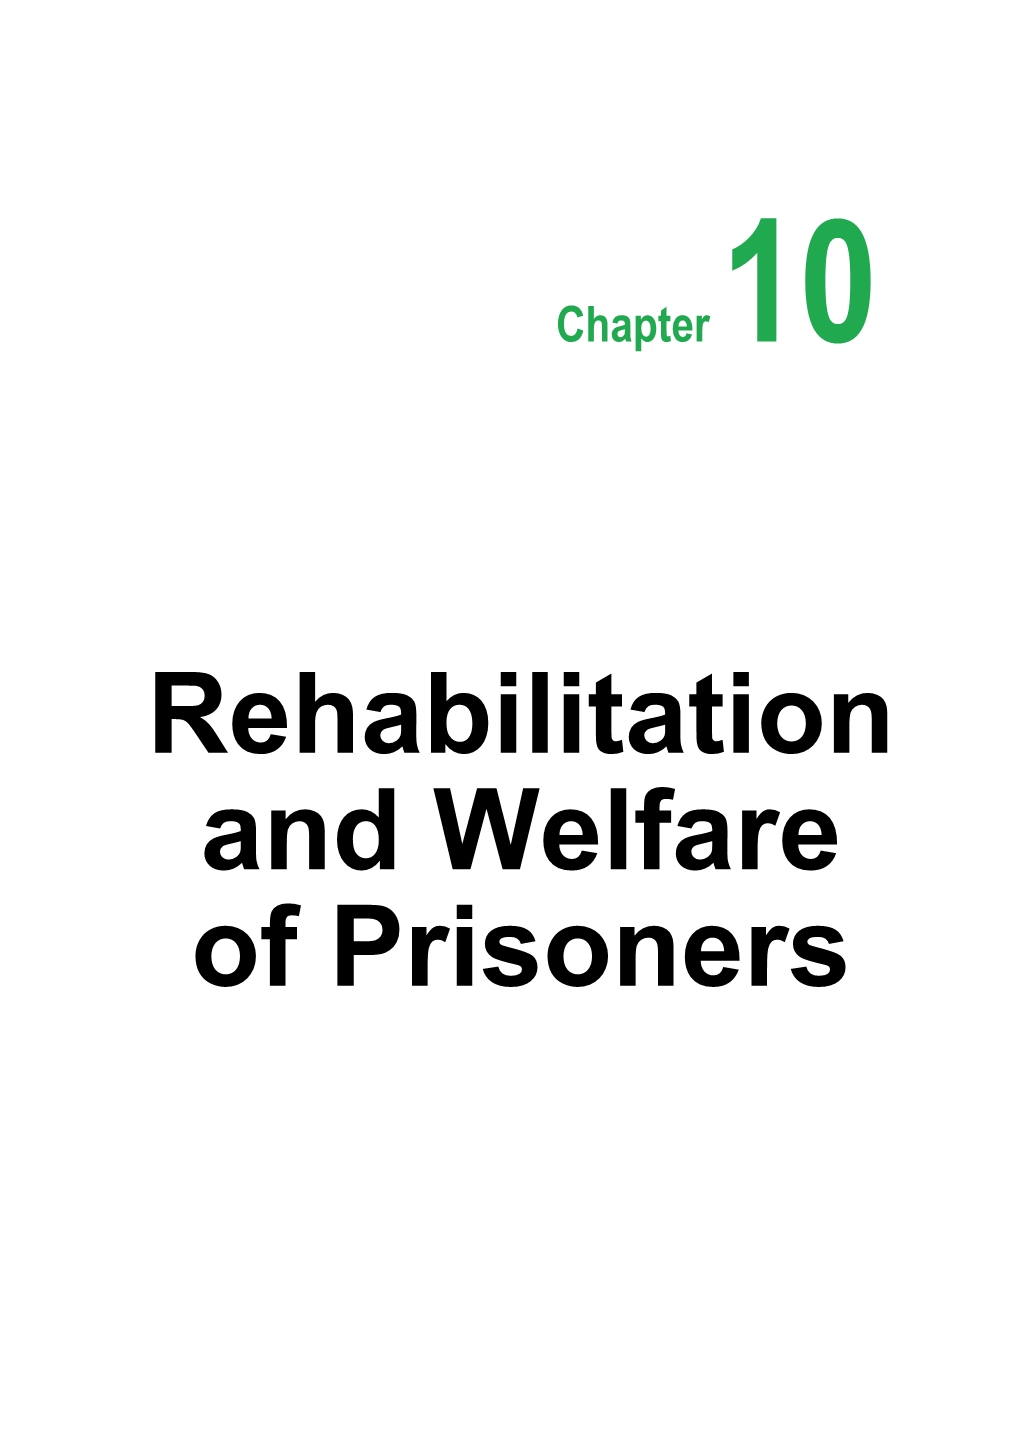 Chapter-10 Rehabilitation and Welfare of Prisoners